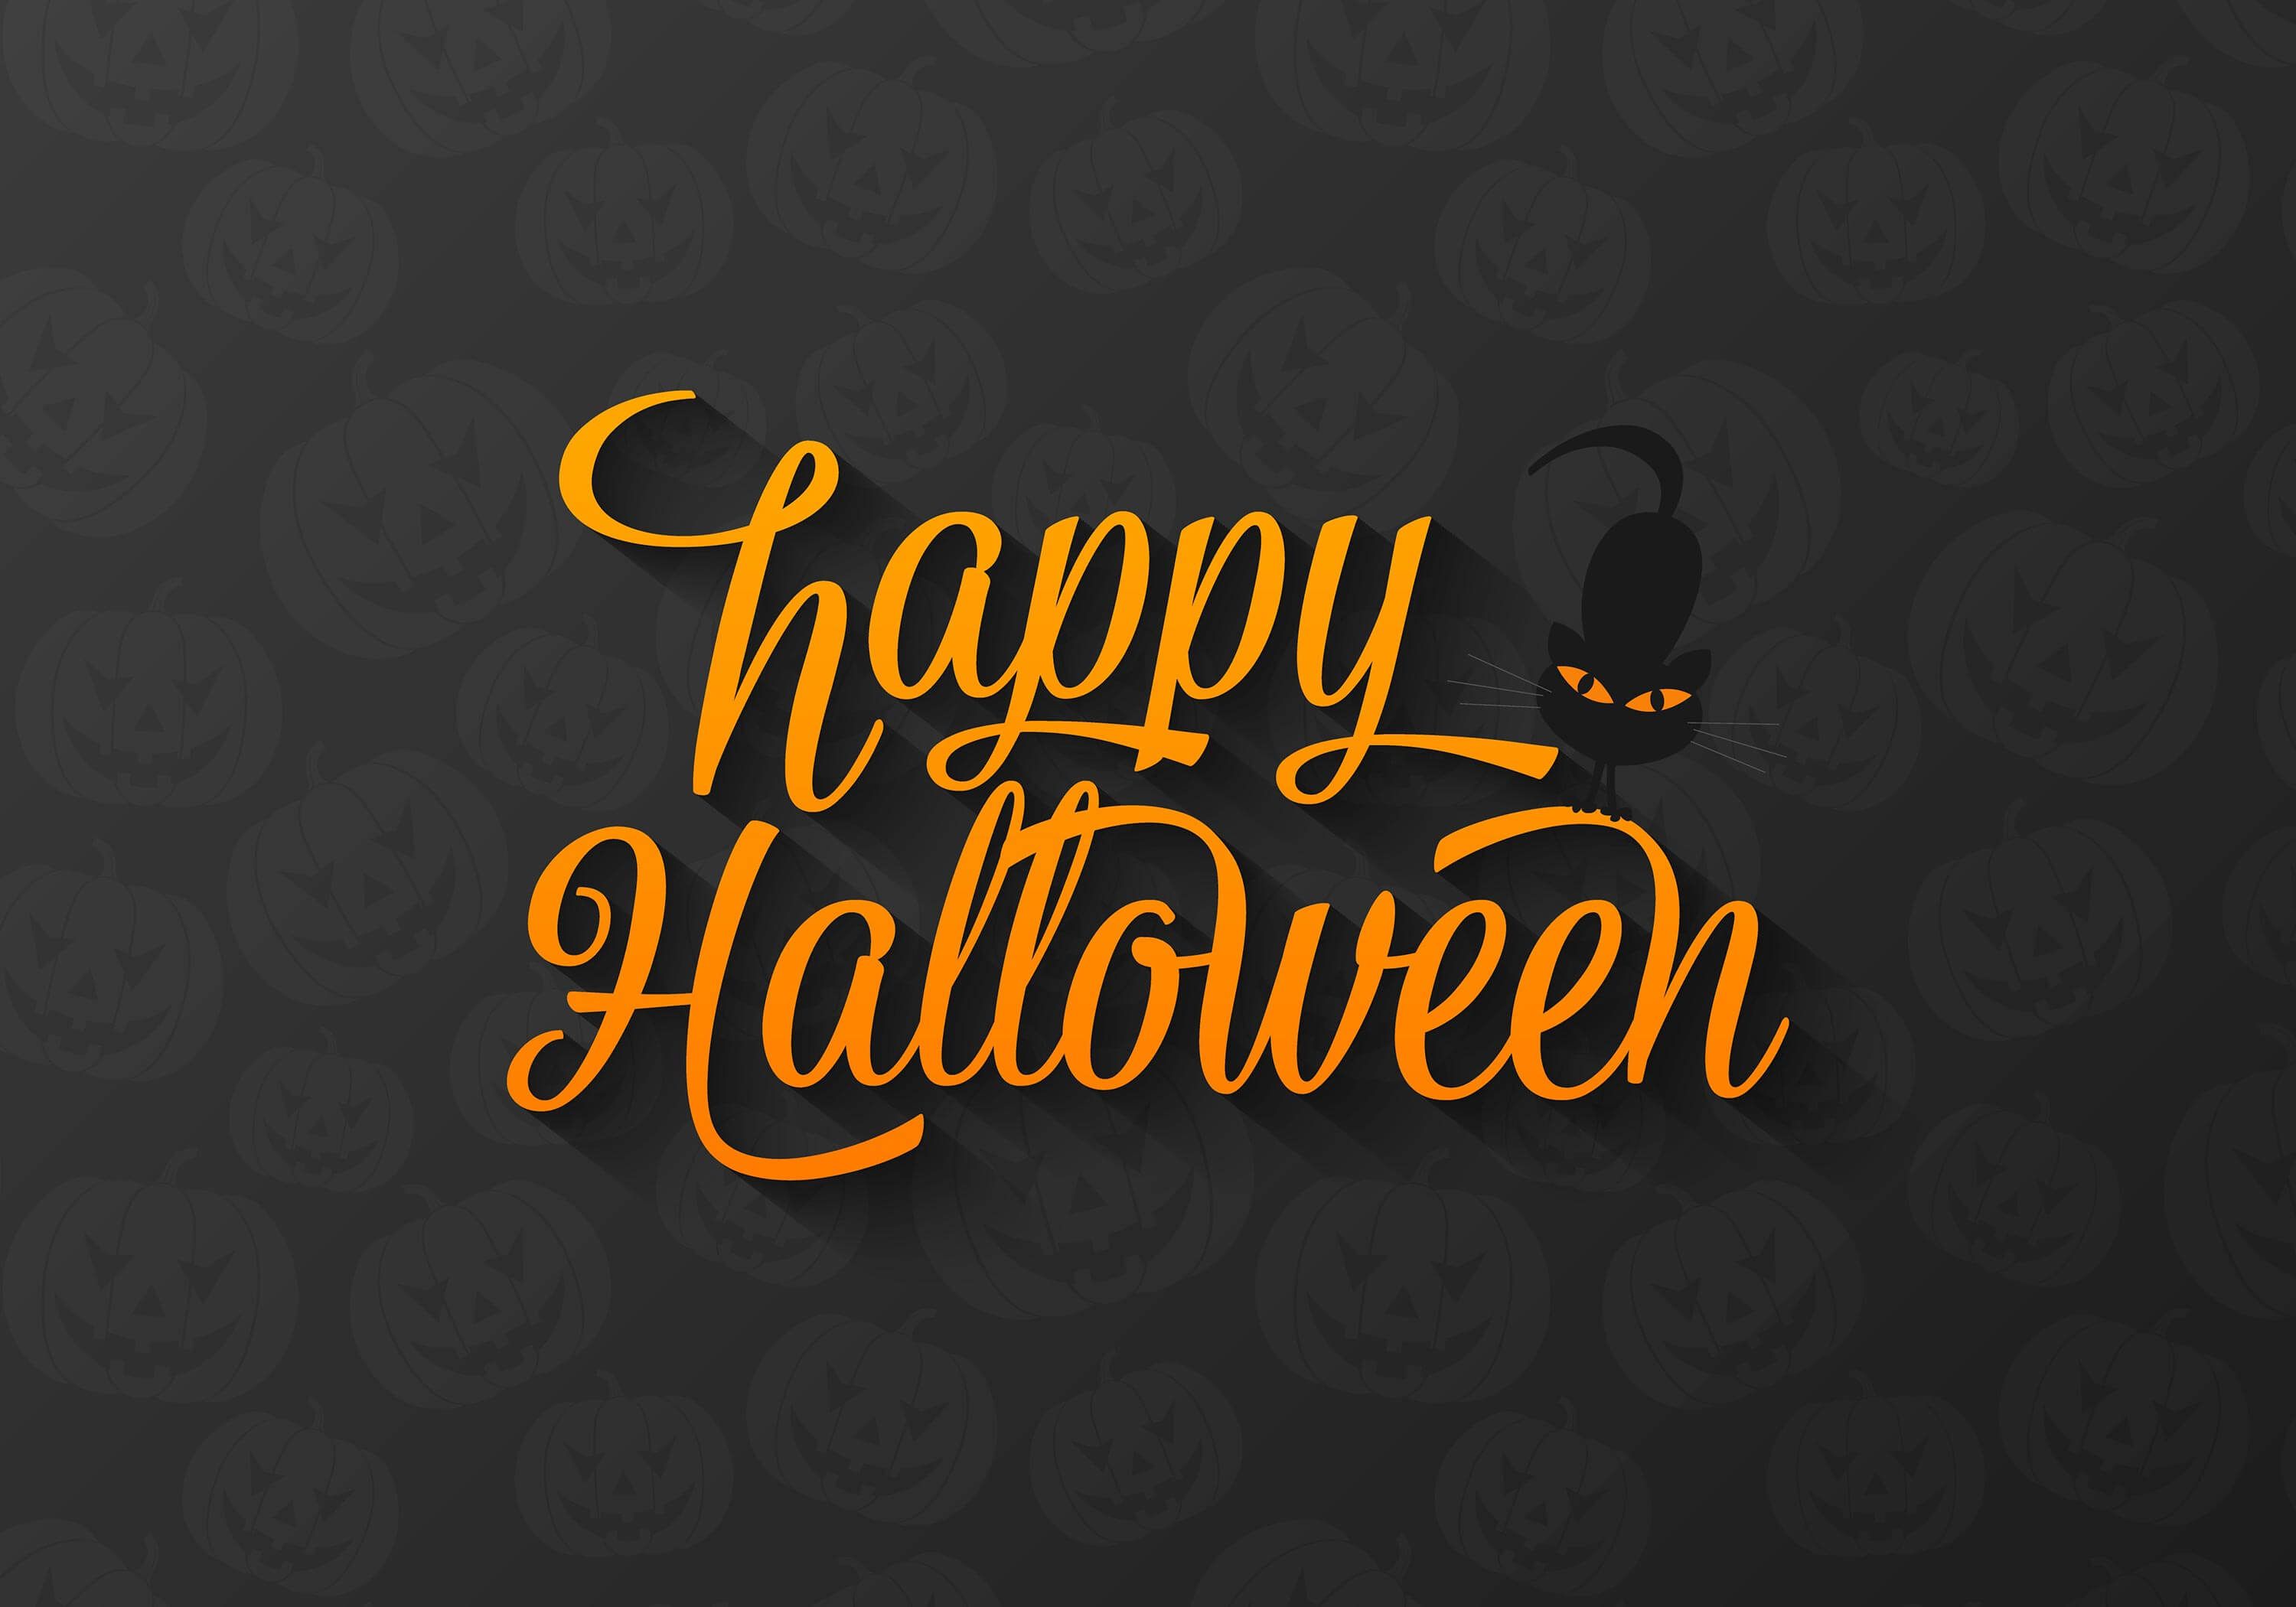 Scary Halloween 2020 Wallpaper HD, Background, Pumpkins, Witches, Bats & Ghosts